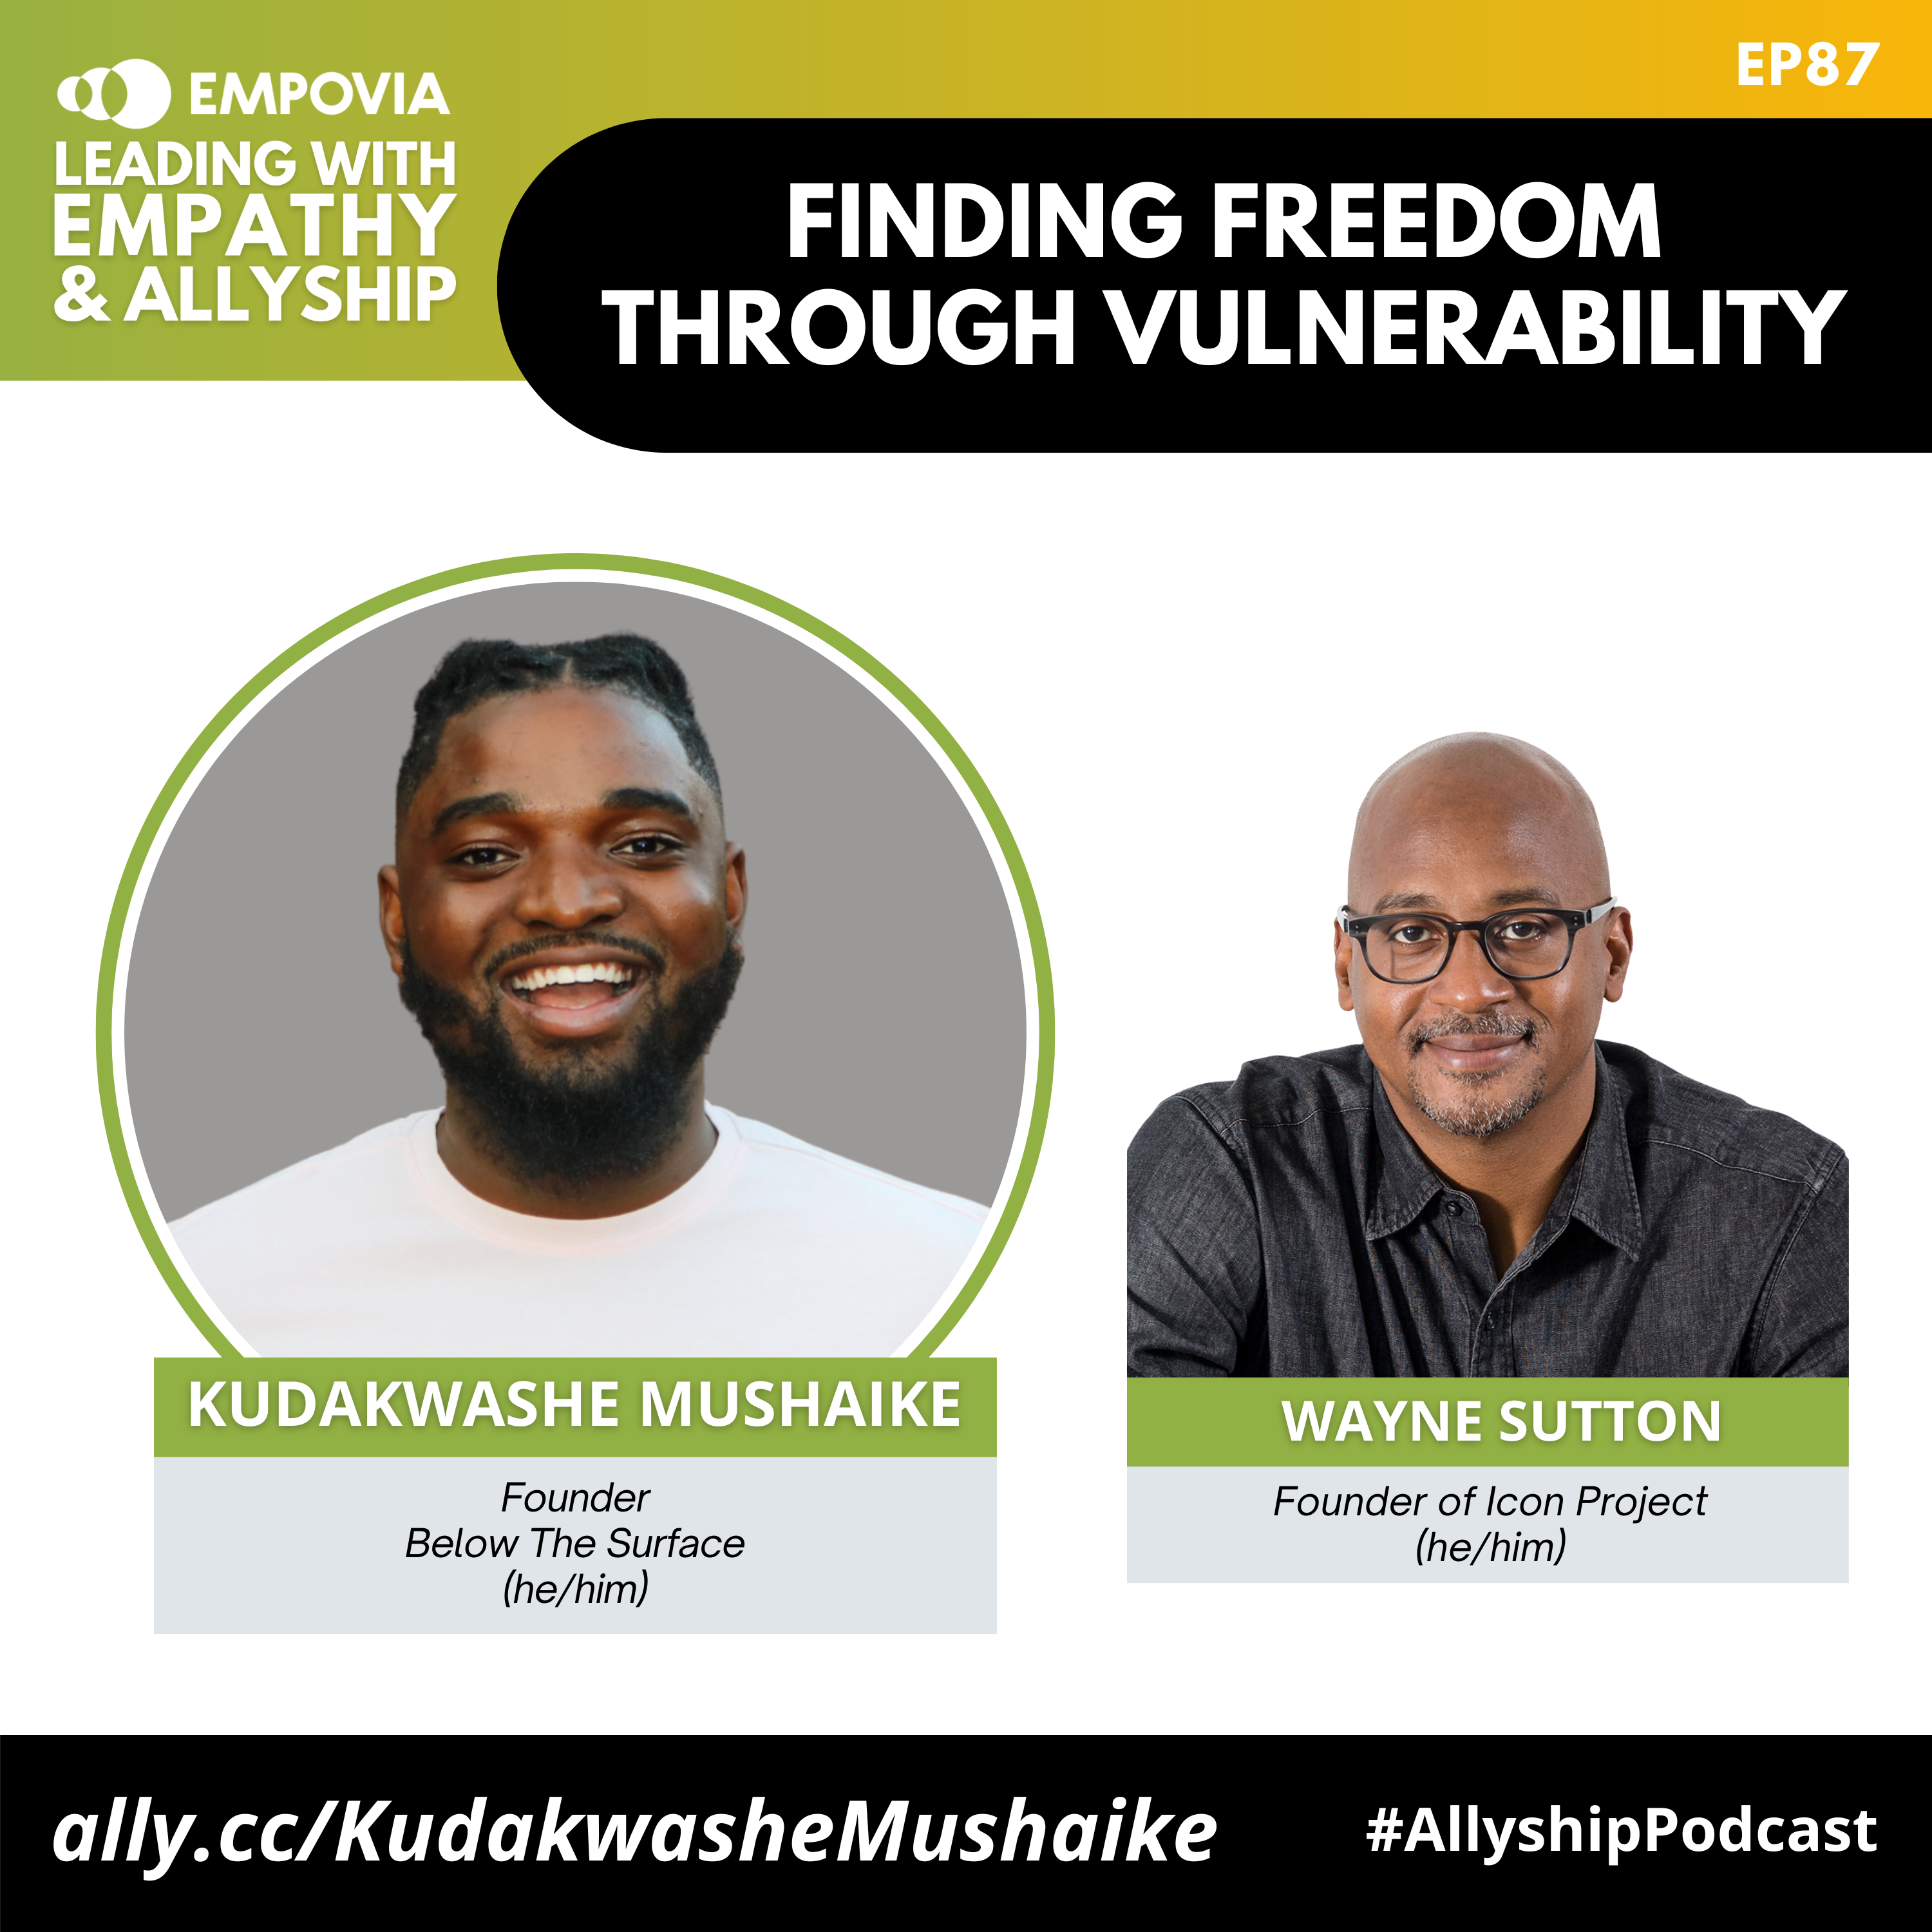 Leading With Empathy & Allyship promo and photos of Kudakwashe Mushaike, a Black man with black hair, black beard, and white t-shirt, and host Wayne Sutton, a bald Black man with salt and pepper beard, glasses, and a dark gray shirt.